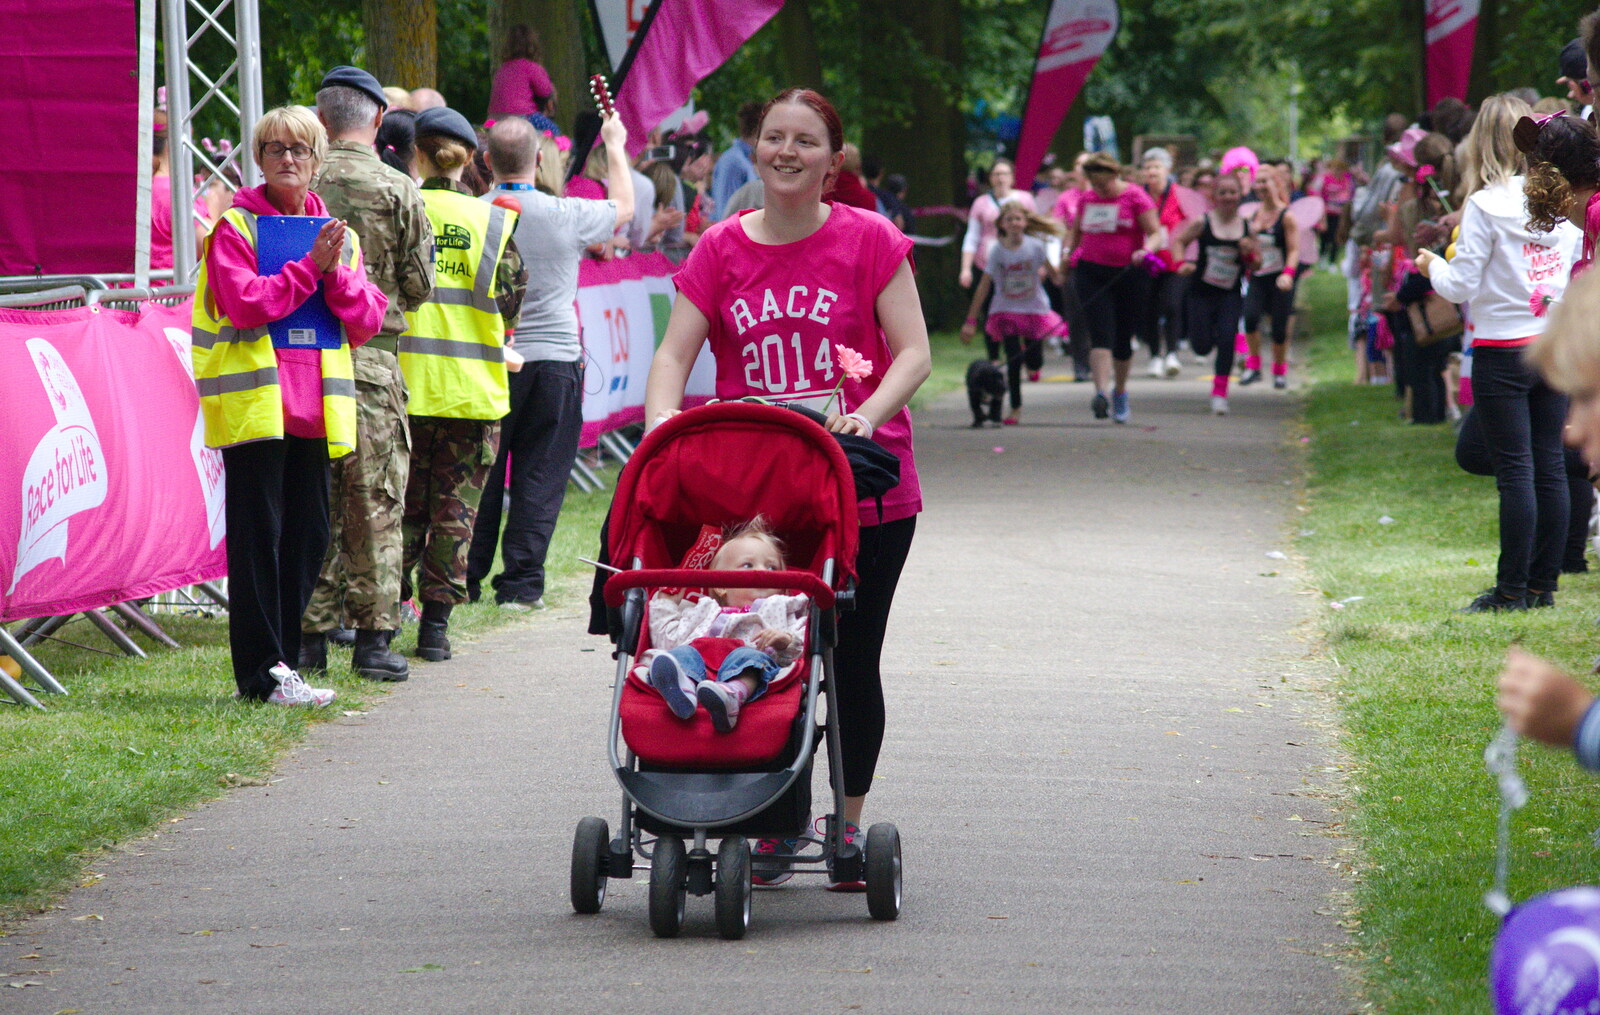 A buggy is pushed around from Isobel's Race For Life, Chantry Park, Ipswich - 11th June 2014